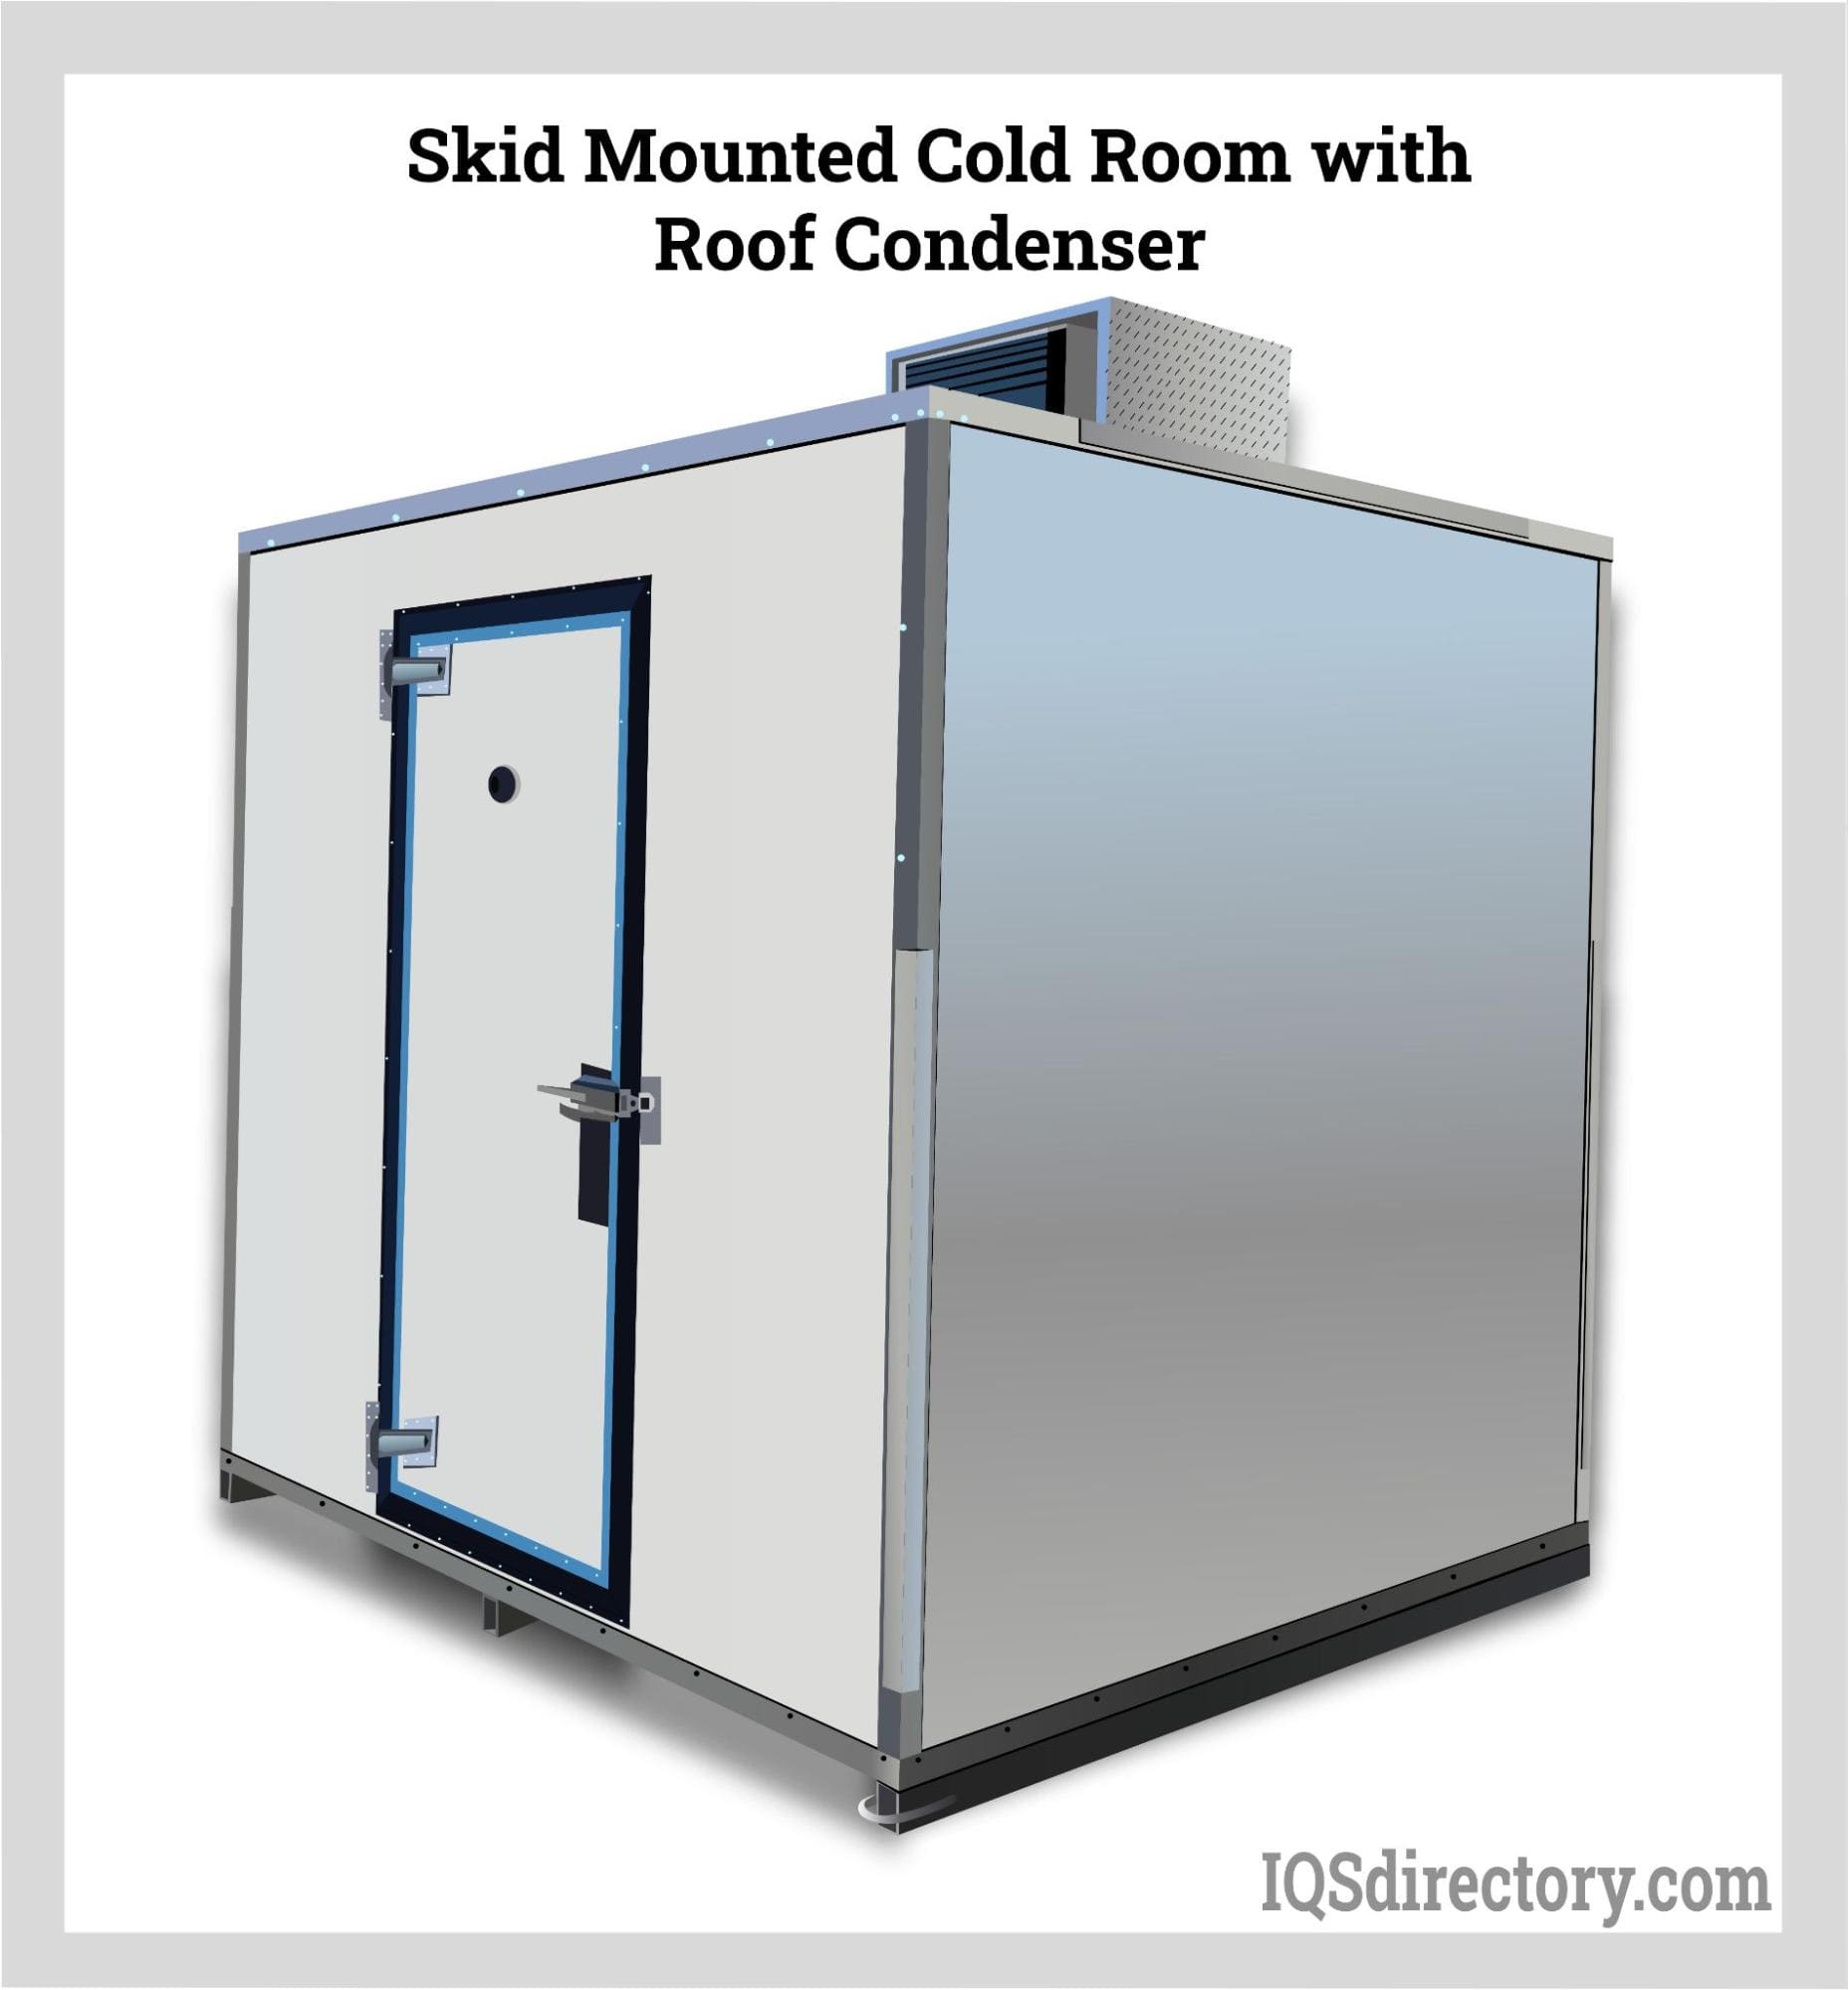 Skid Mounted Cold Room with Roof Condenser